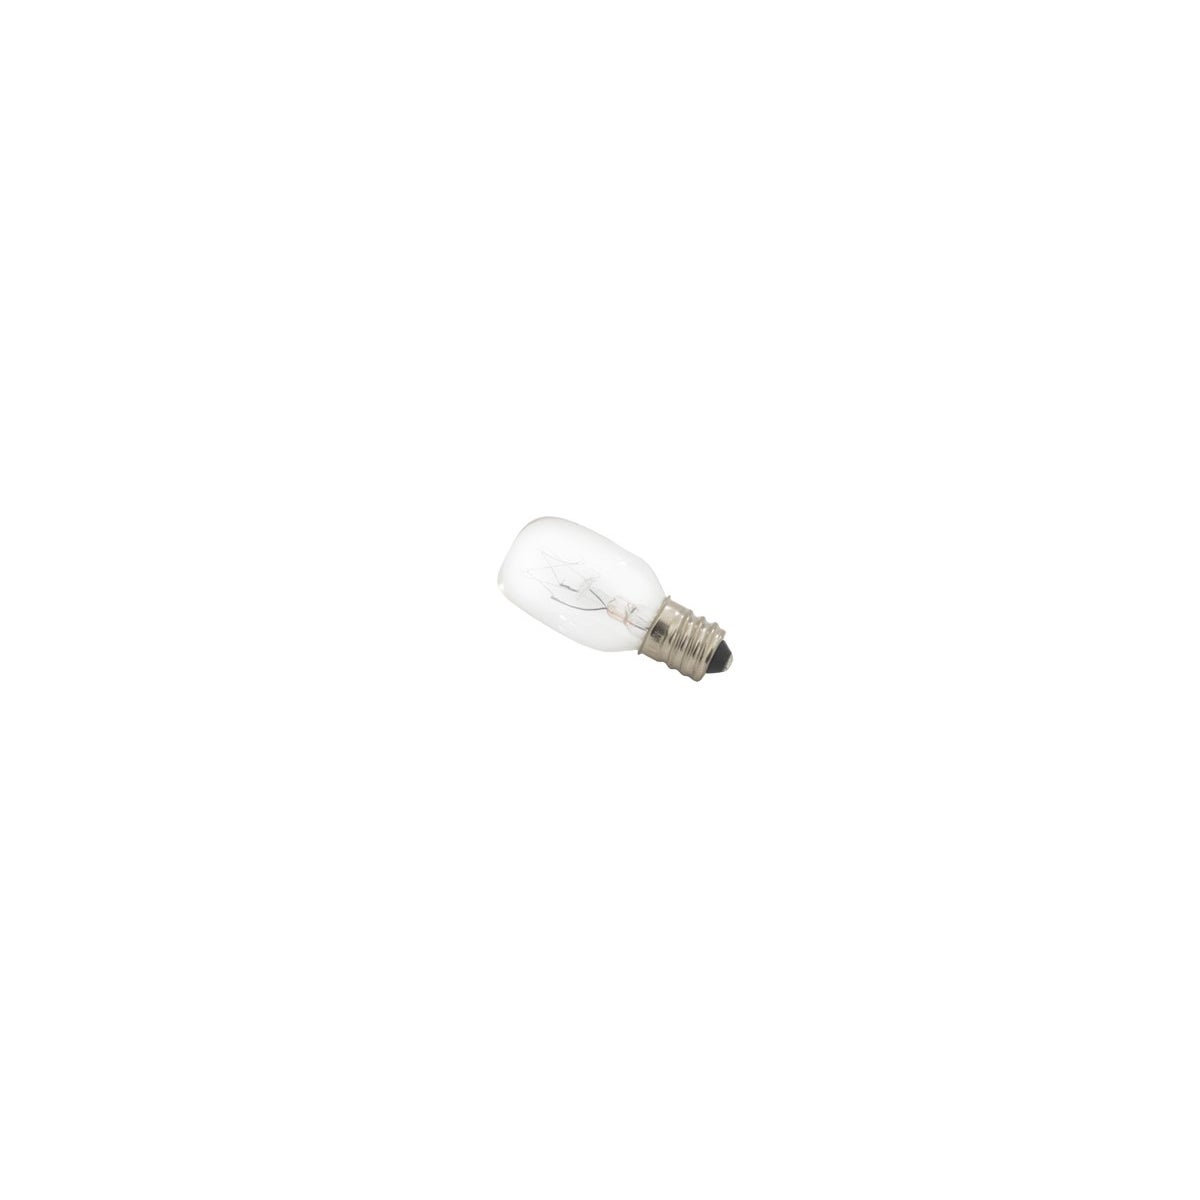 Replacement Bulb - NP7 (15W) Pluggables and Midsize Illuminations